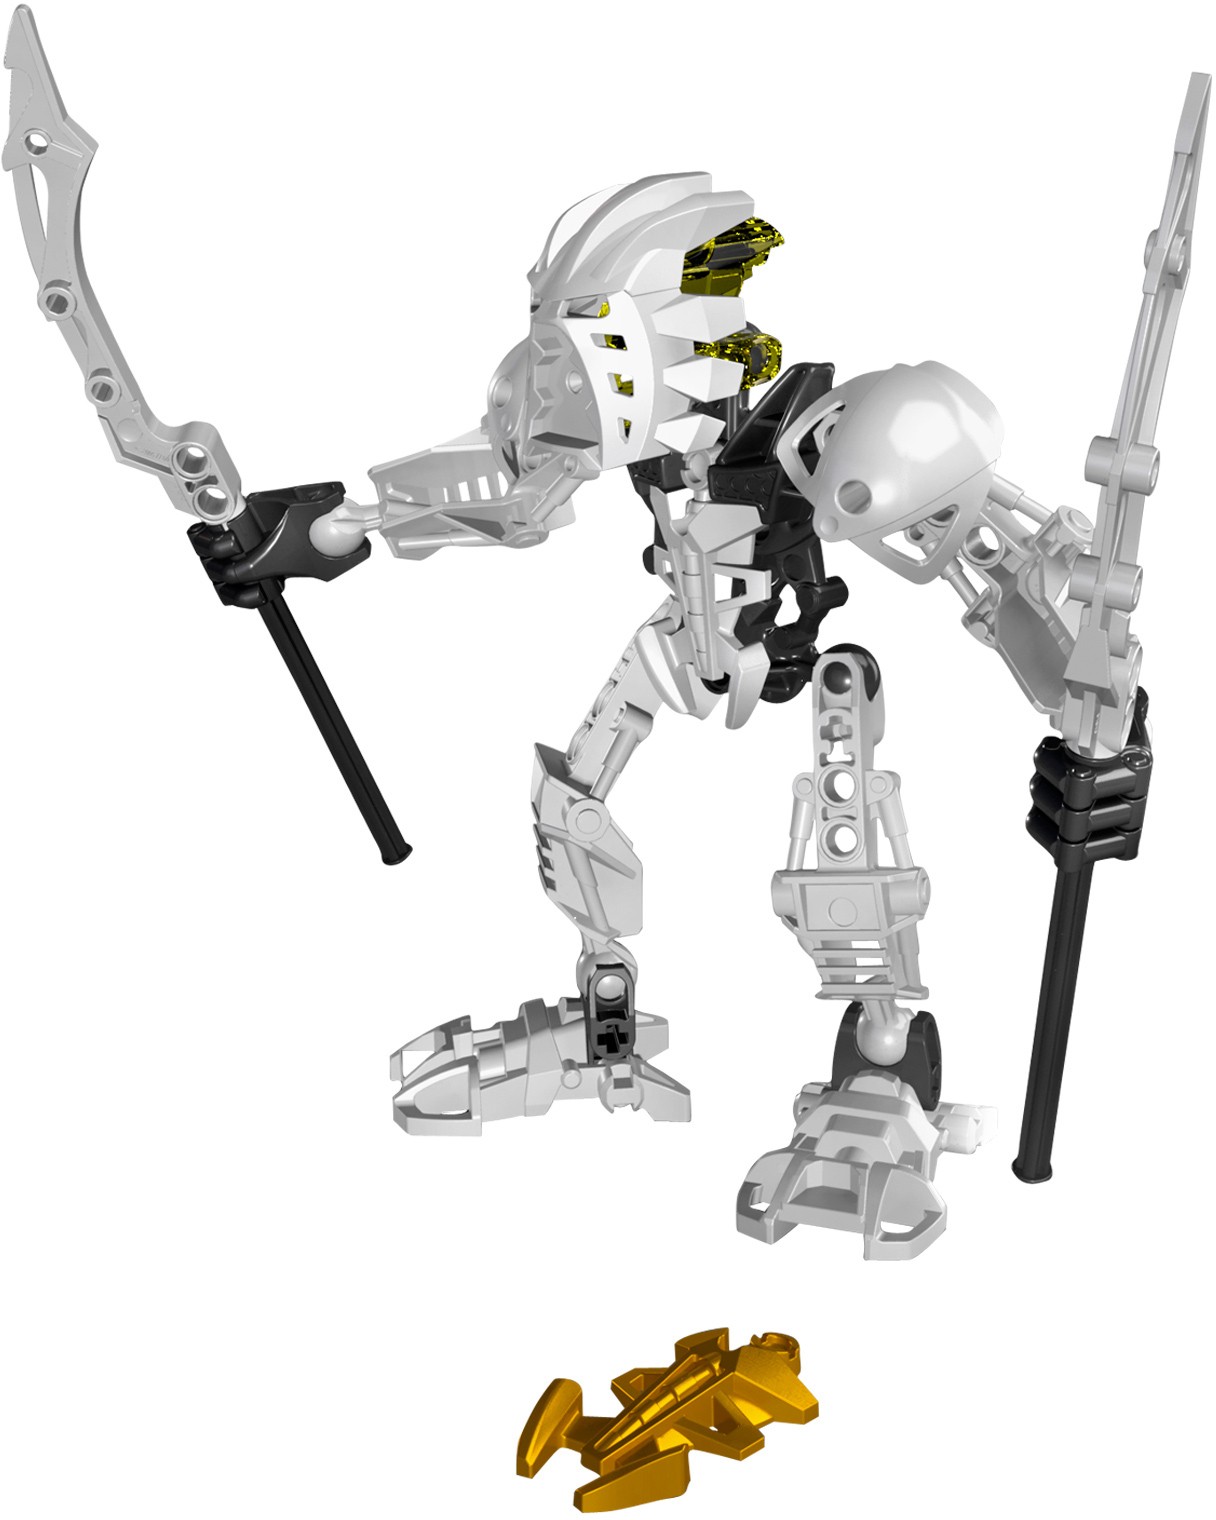 Bionicle | 2010 | Brickset: LEGO guide and